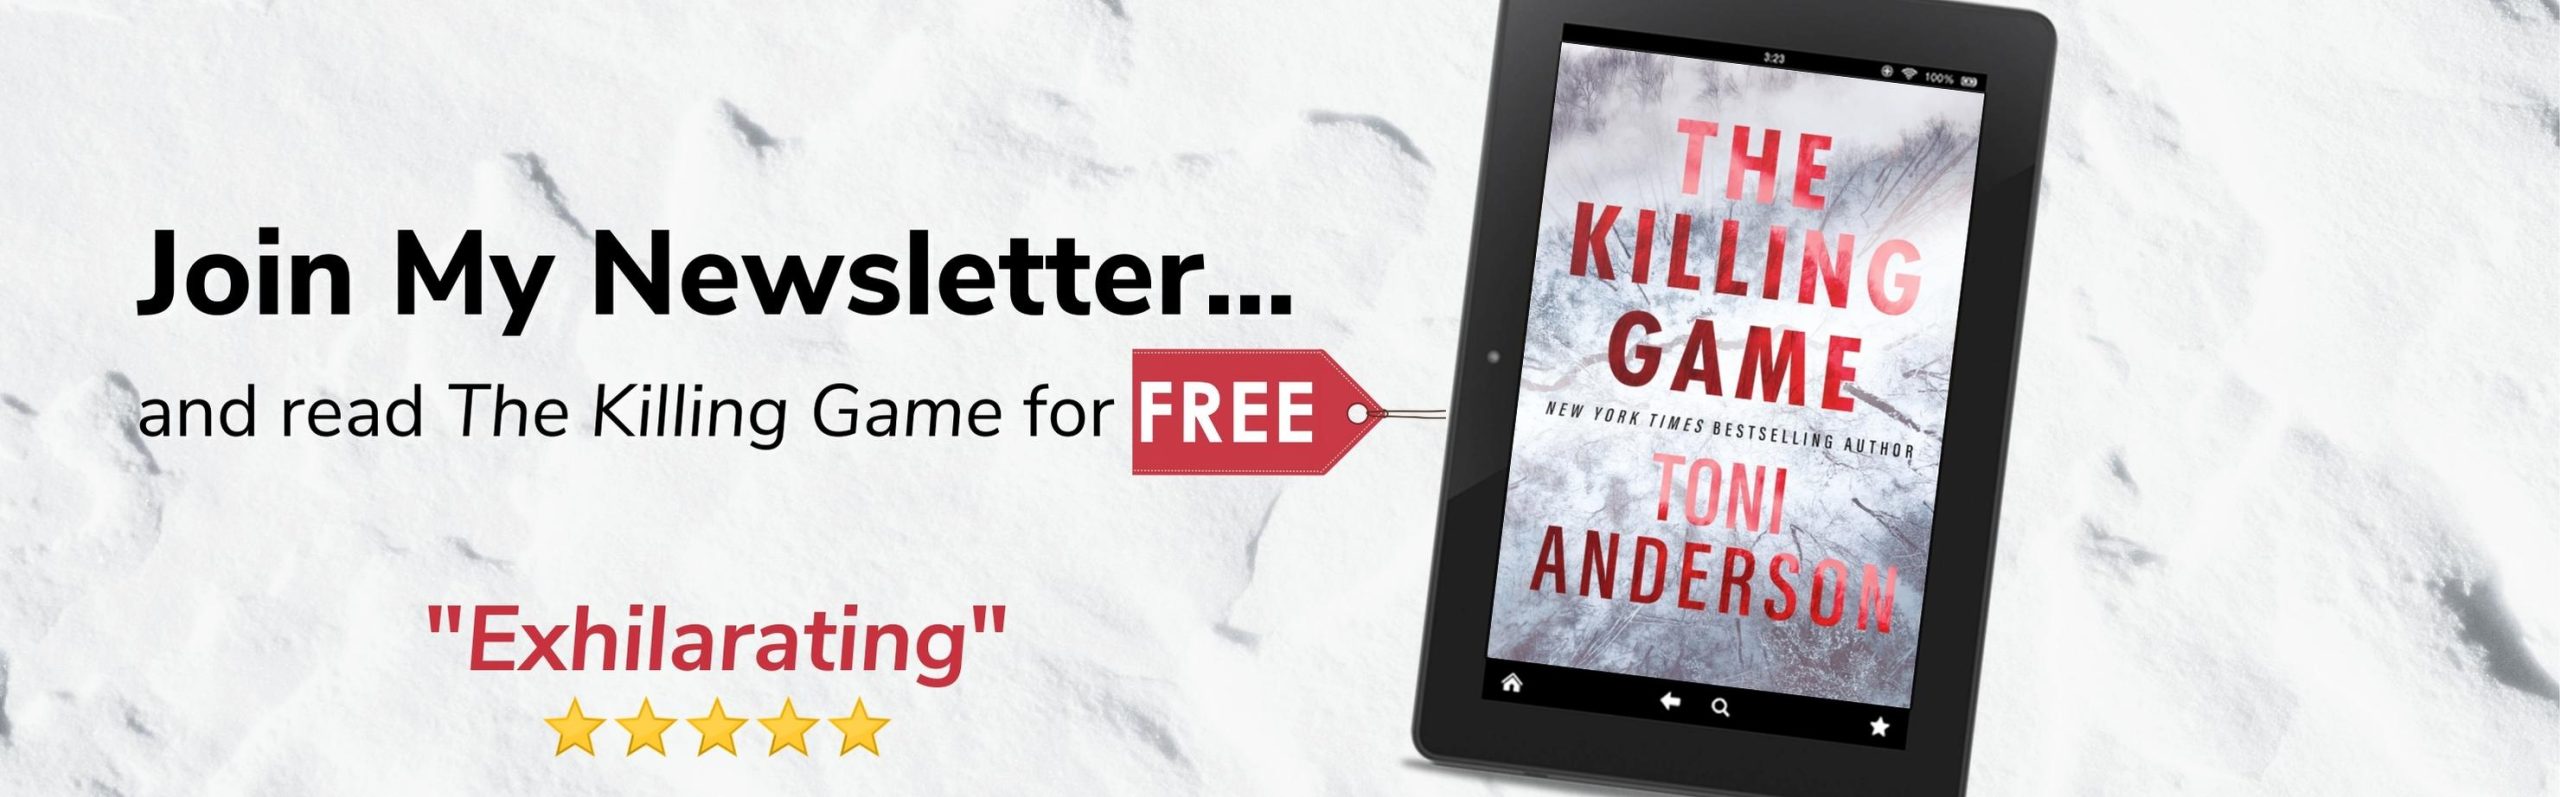 Signup for my Newsletter and receive a free copy of The Killing Game